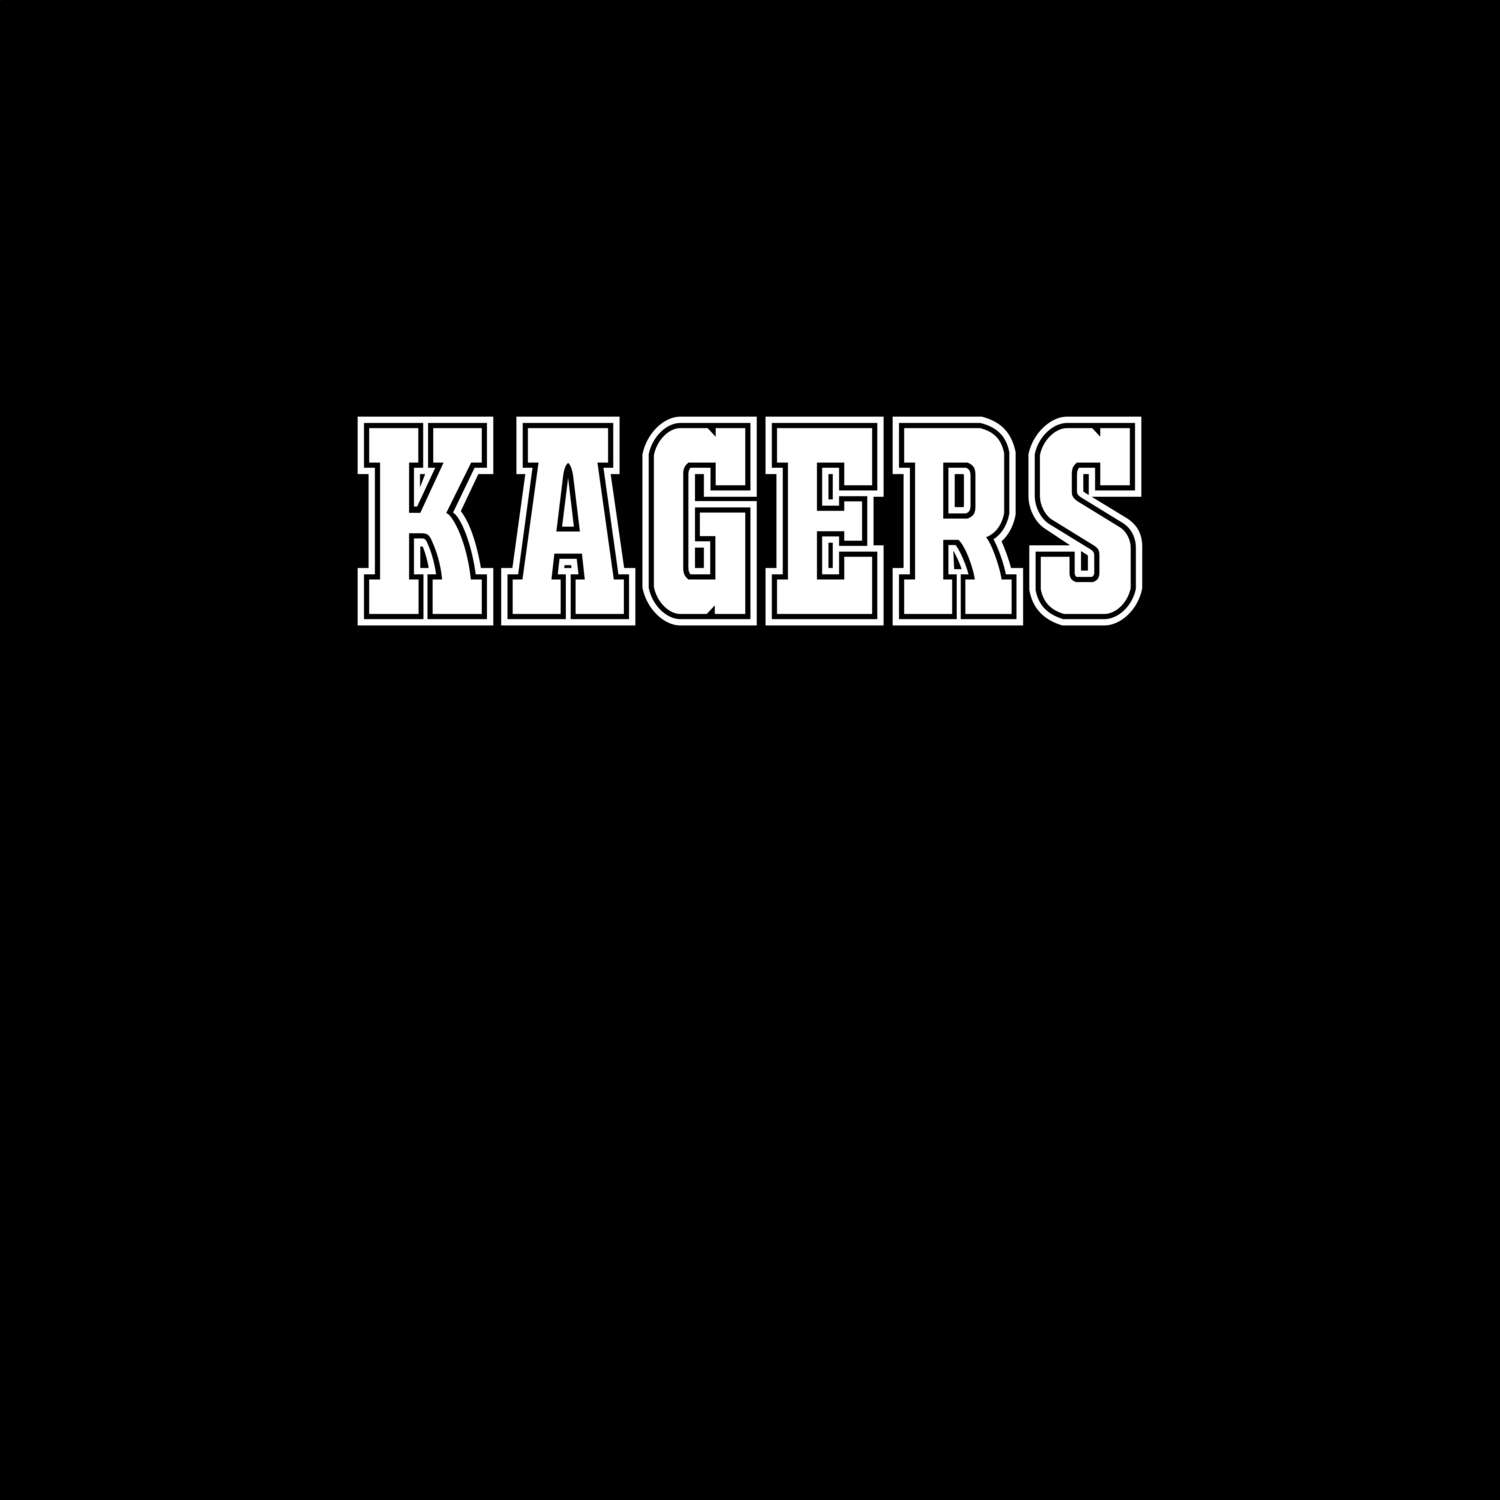 Kagers T-Shirt »Classic«